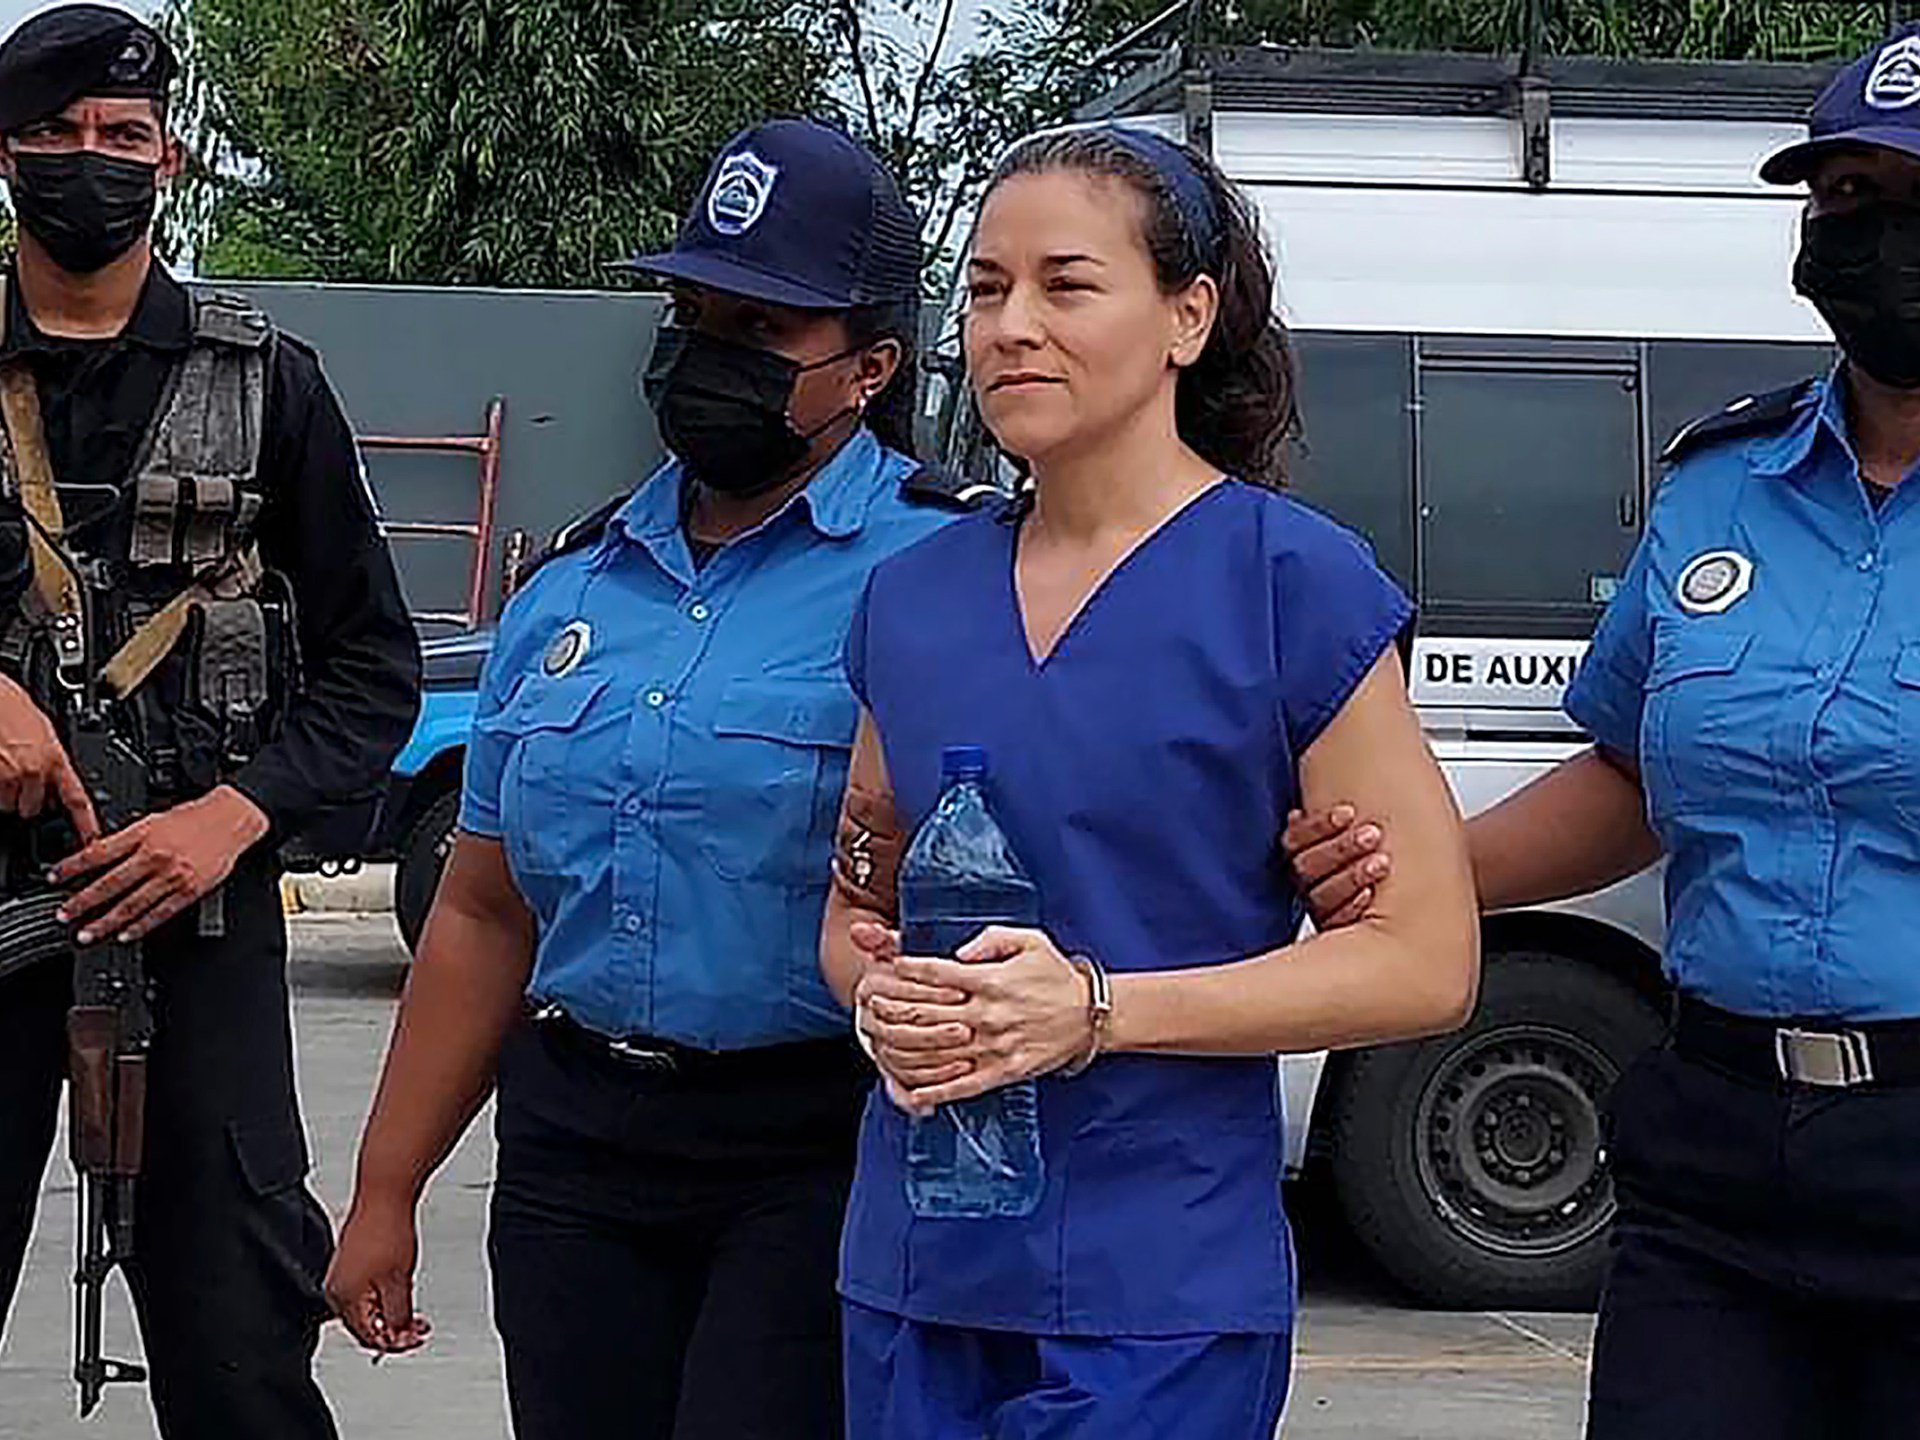 Imprisoned and exiled, a Nicaraguan activist rebuilds her life in the US